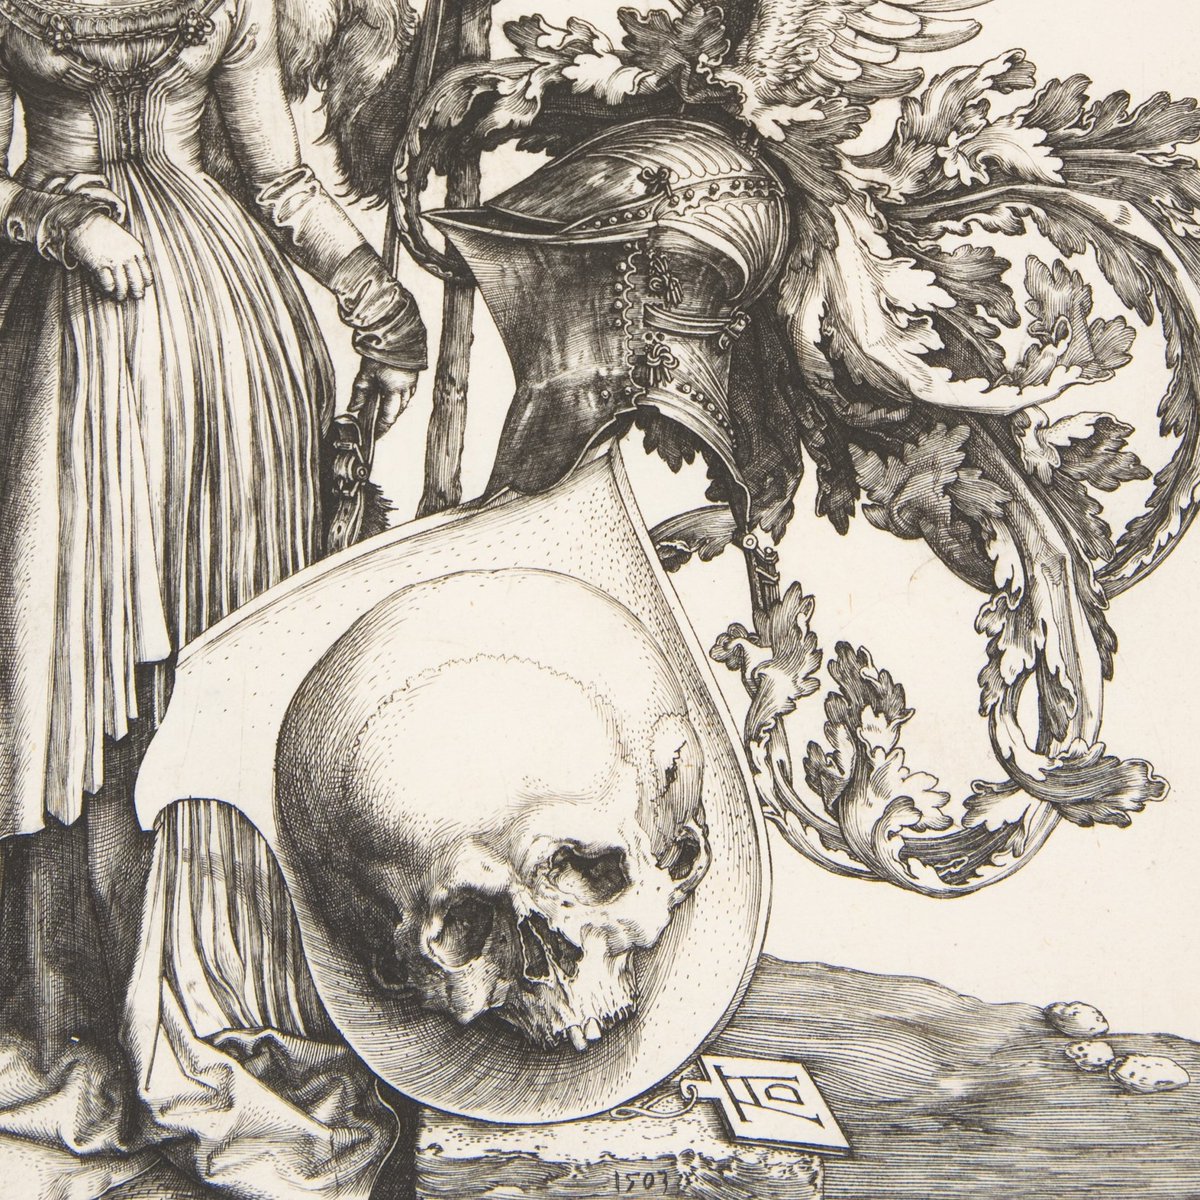 The 'momento mori' message (to live life to the fullest, because death comes for us all) continued to be a popular theme in  #medieval and  #Renaissance art, especially in Germany and the Netherlands, as seen in the work of masters like Albrecht Dürer ( @metmuseum inv 19.73.113)